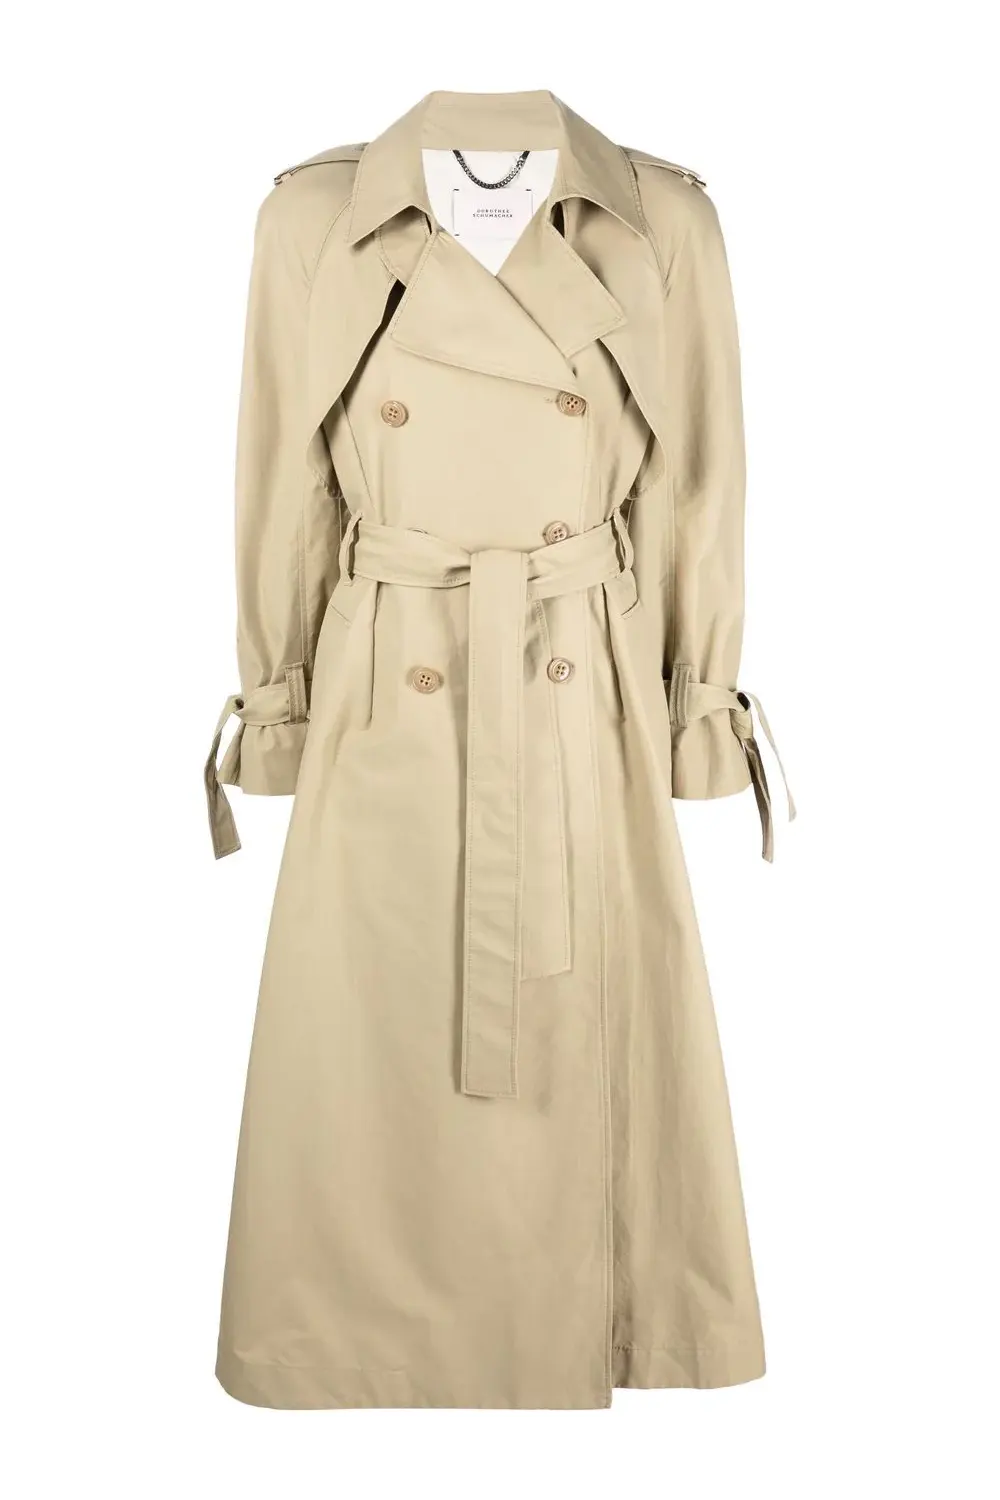 Double-breasted trench coat, khaki beige